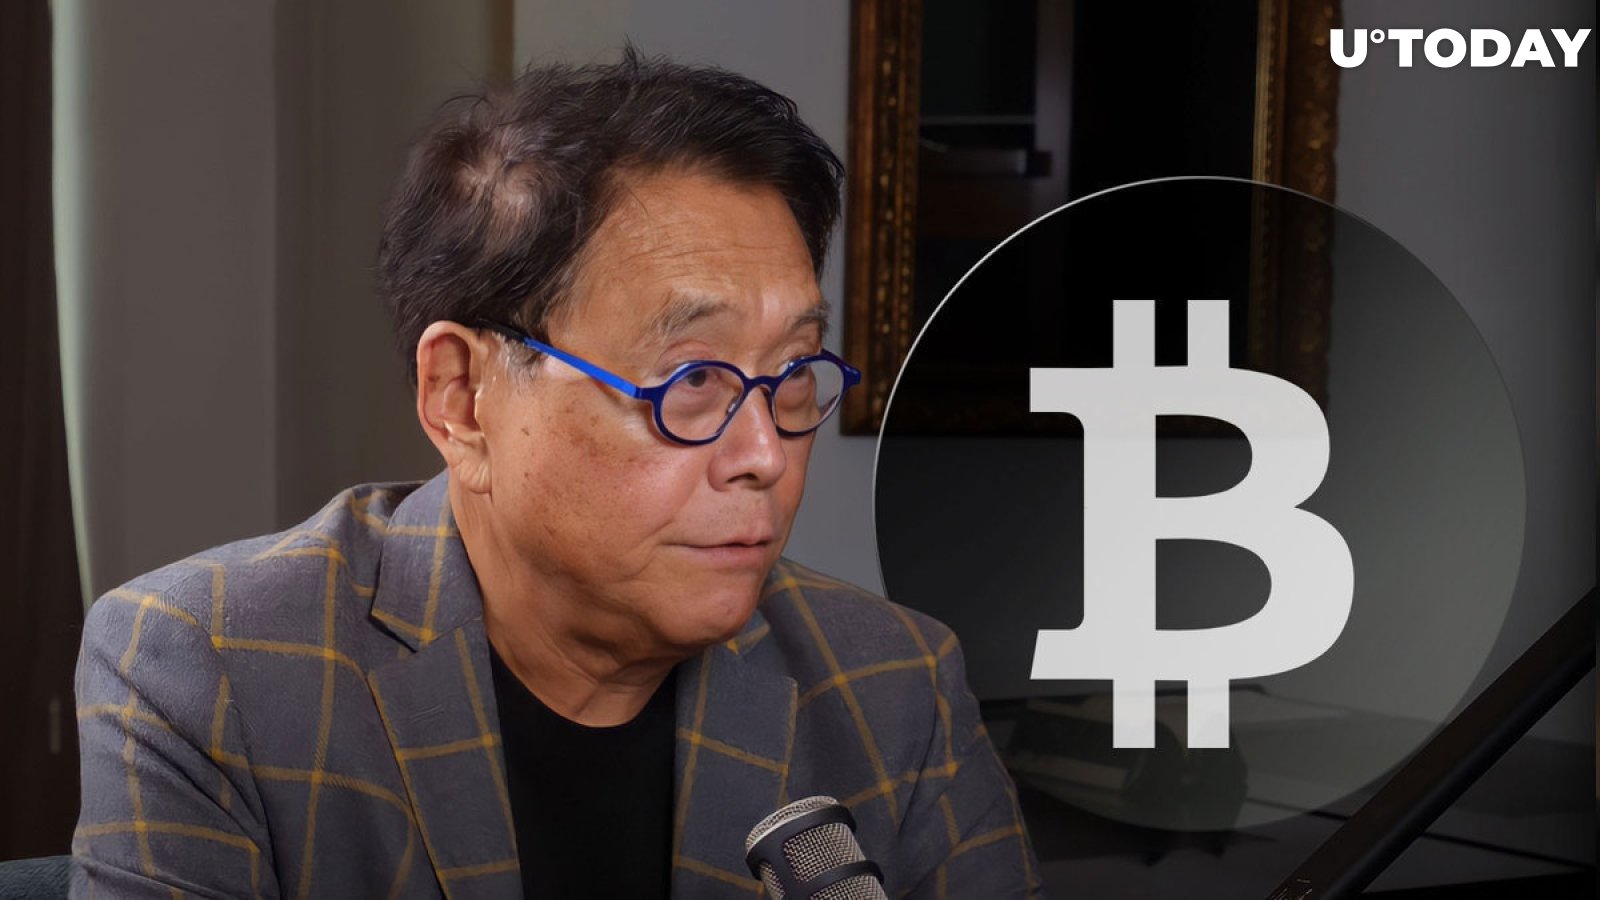  "Rich Dad, Poor Dad" Author Says It's "Possible" That Bitcoin Is a Scam